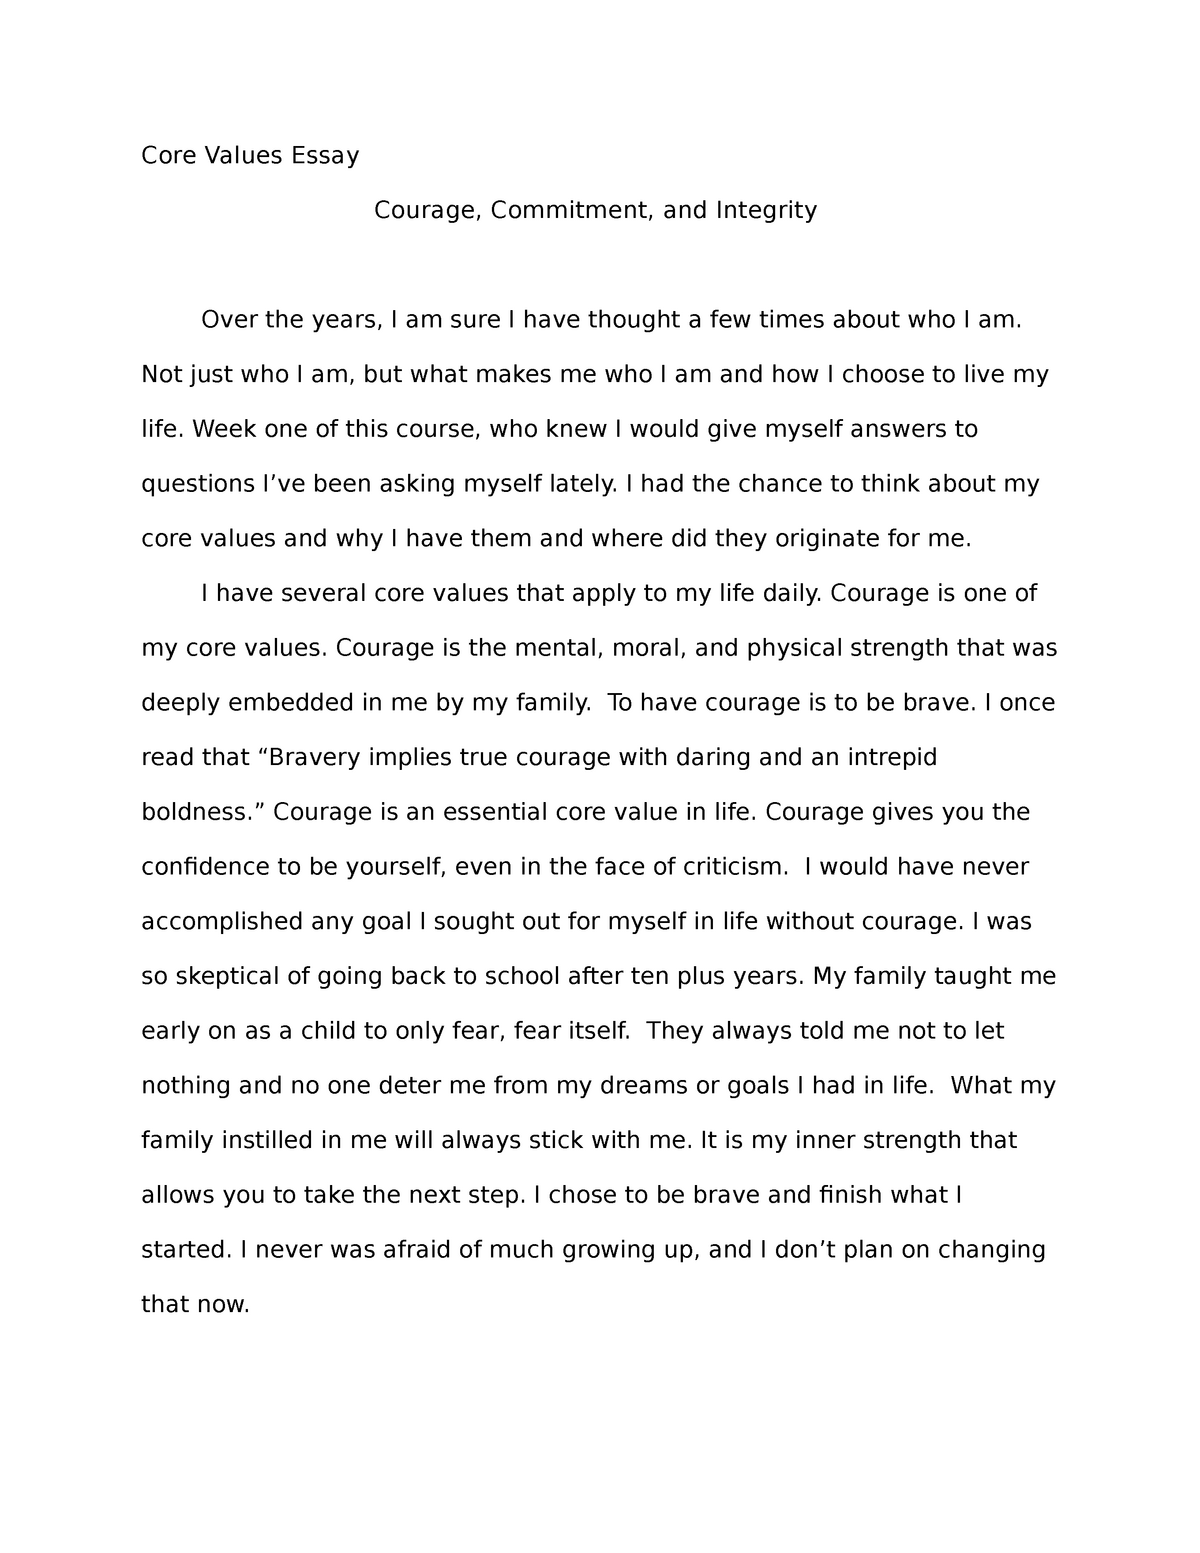 an essay on core values